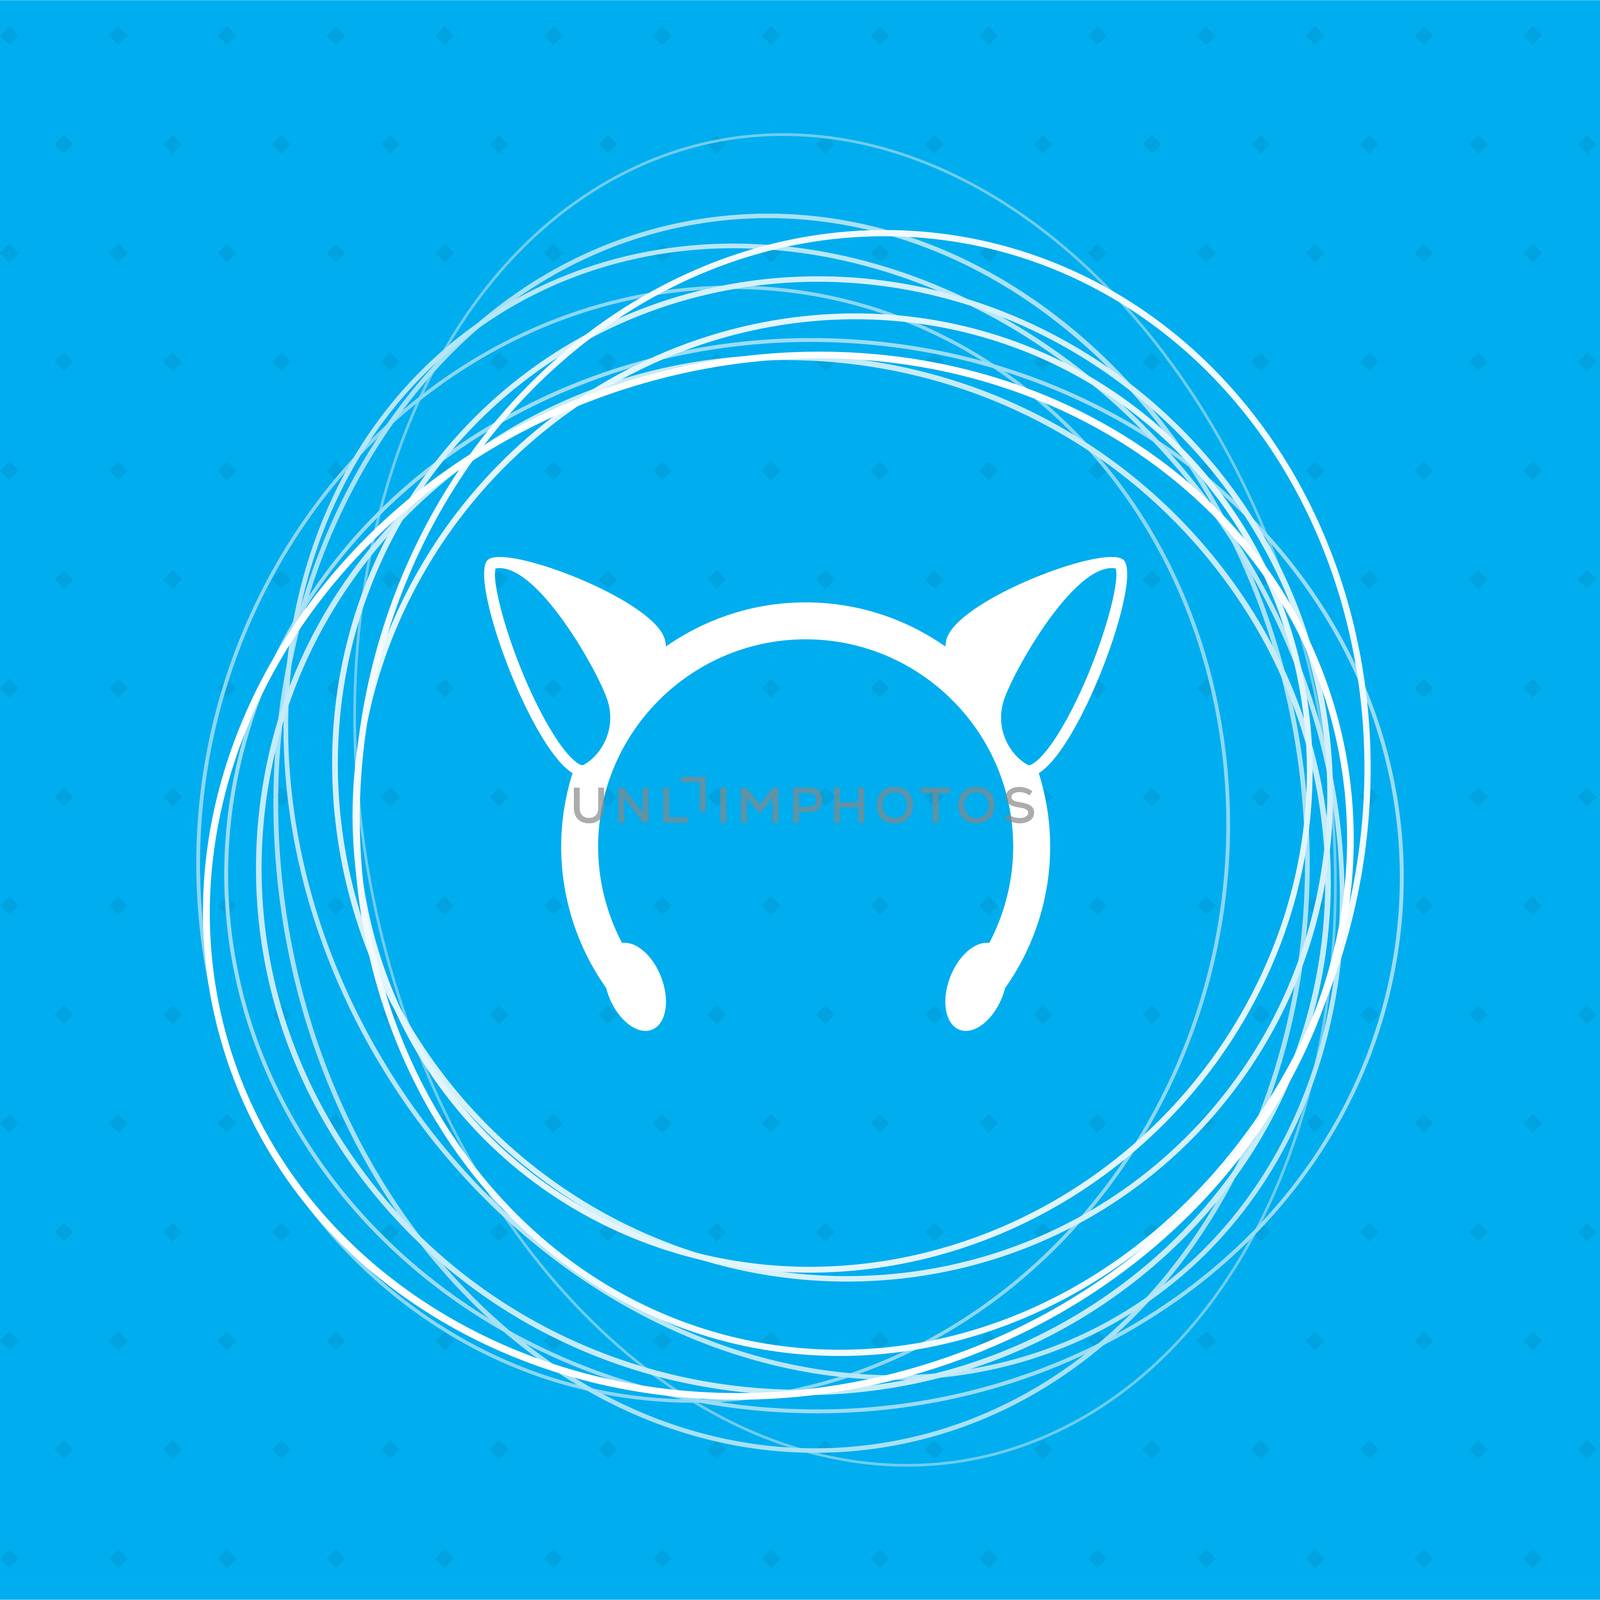 Christmas carnivals ears icon on a blue background with abstract circles around and place for your text. illustration